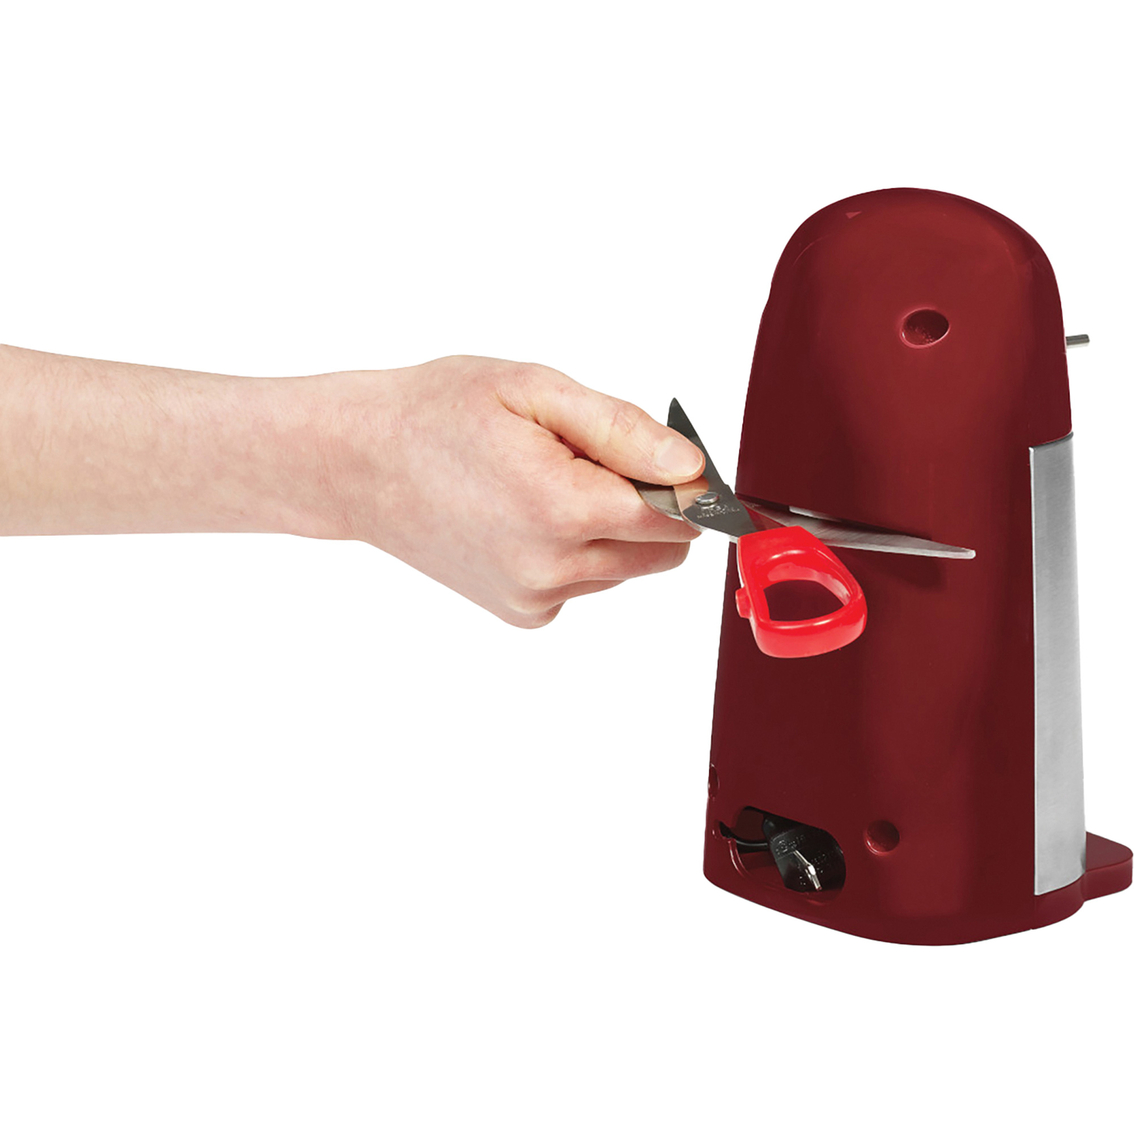  BELLA Electric Can Opener and Knife Sharpener